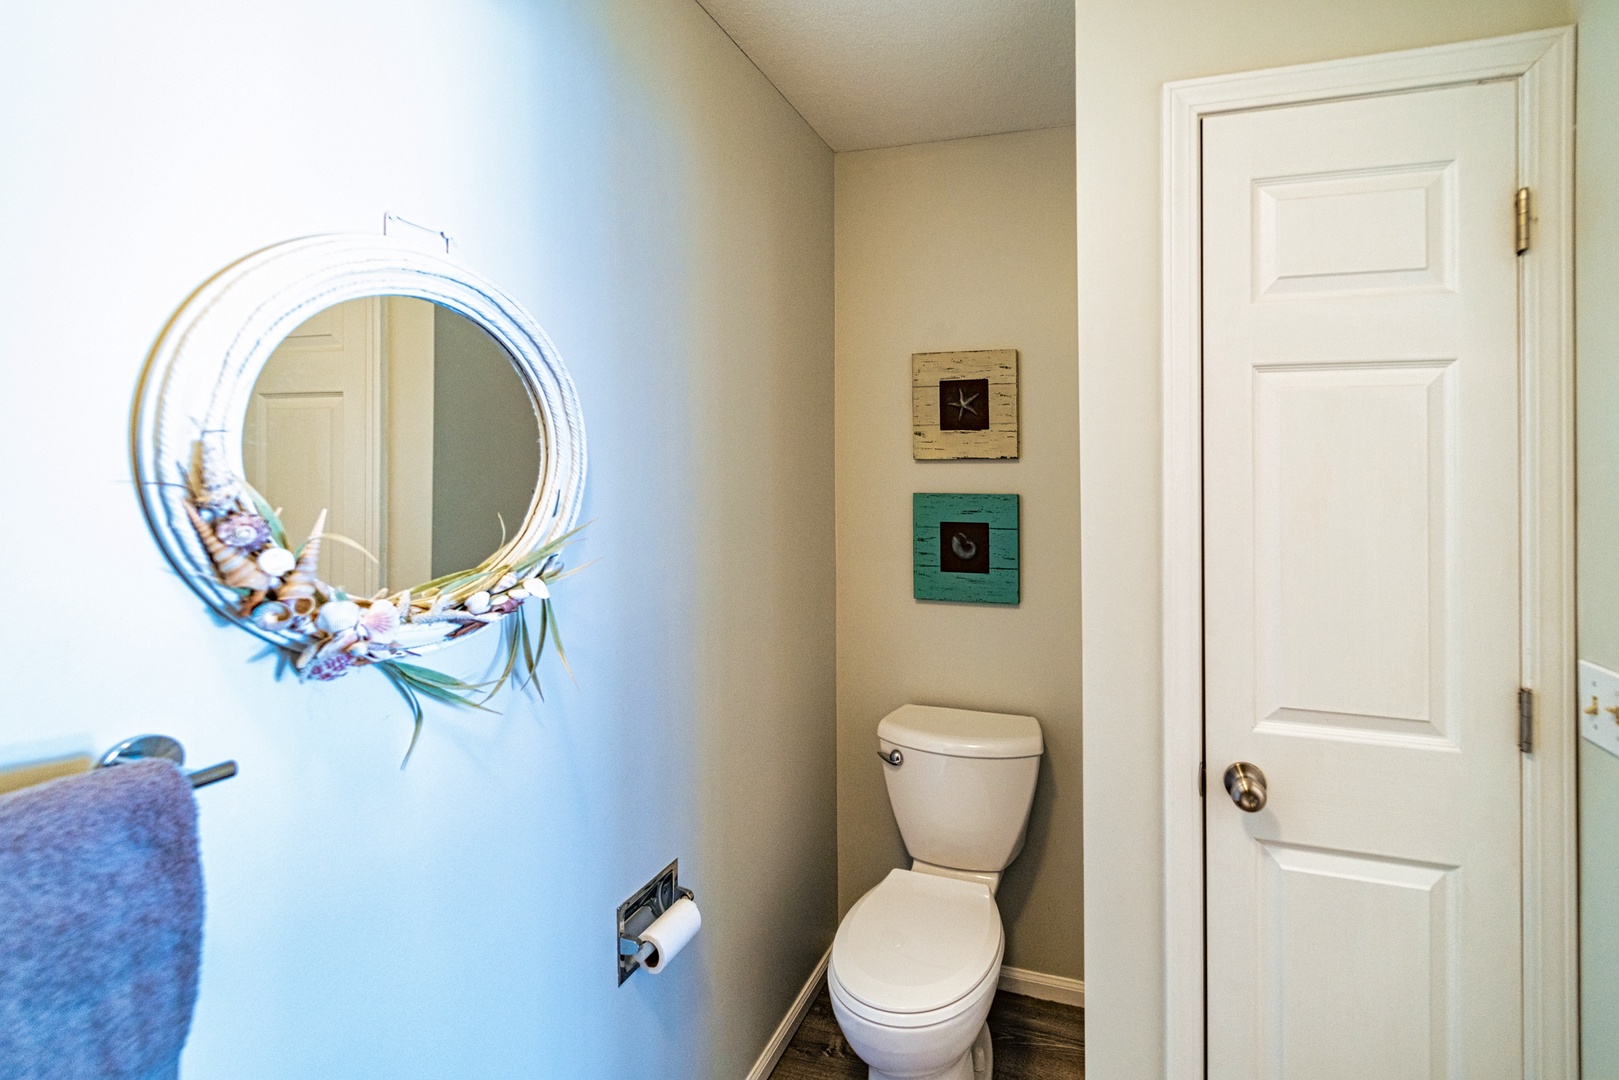 The queen ensuite includes a double vanity, shower/tub combo & closet